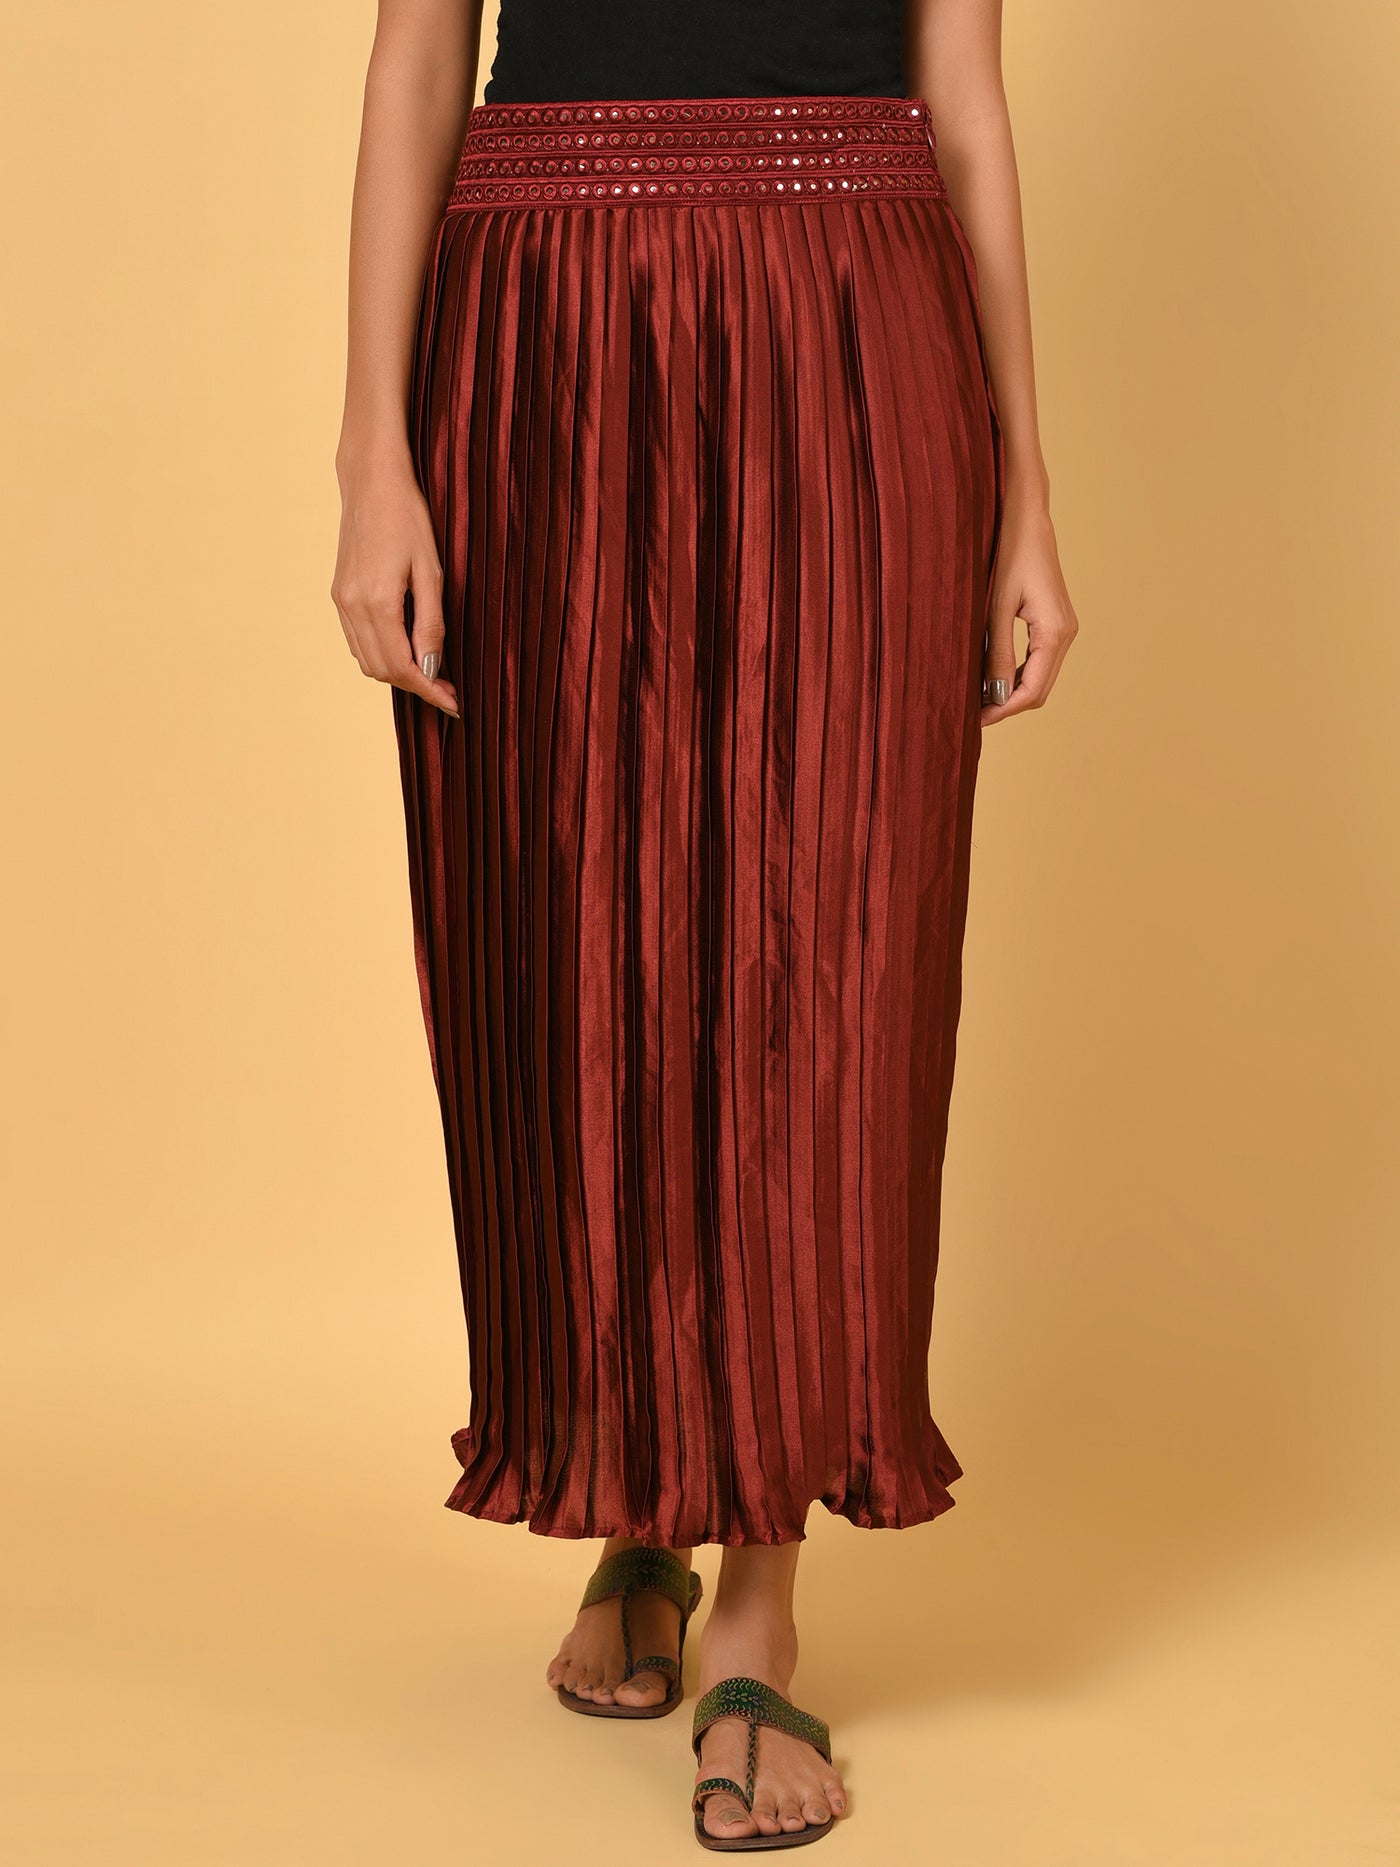 Sway in the Red pleated satin skirt